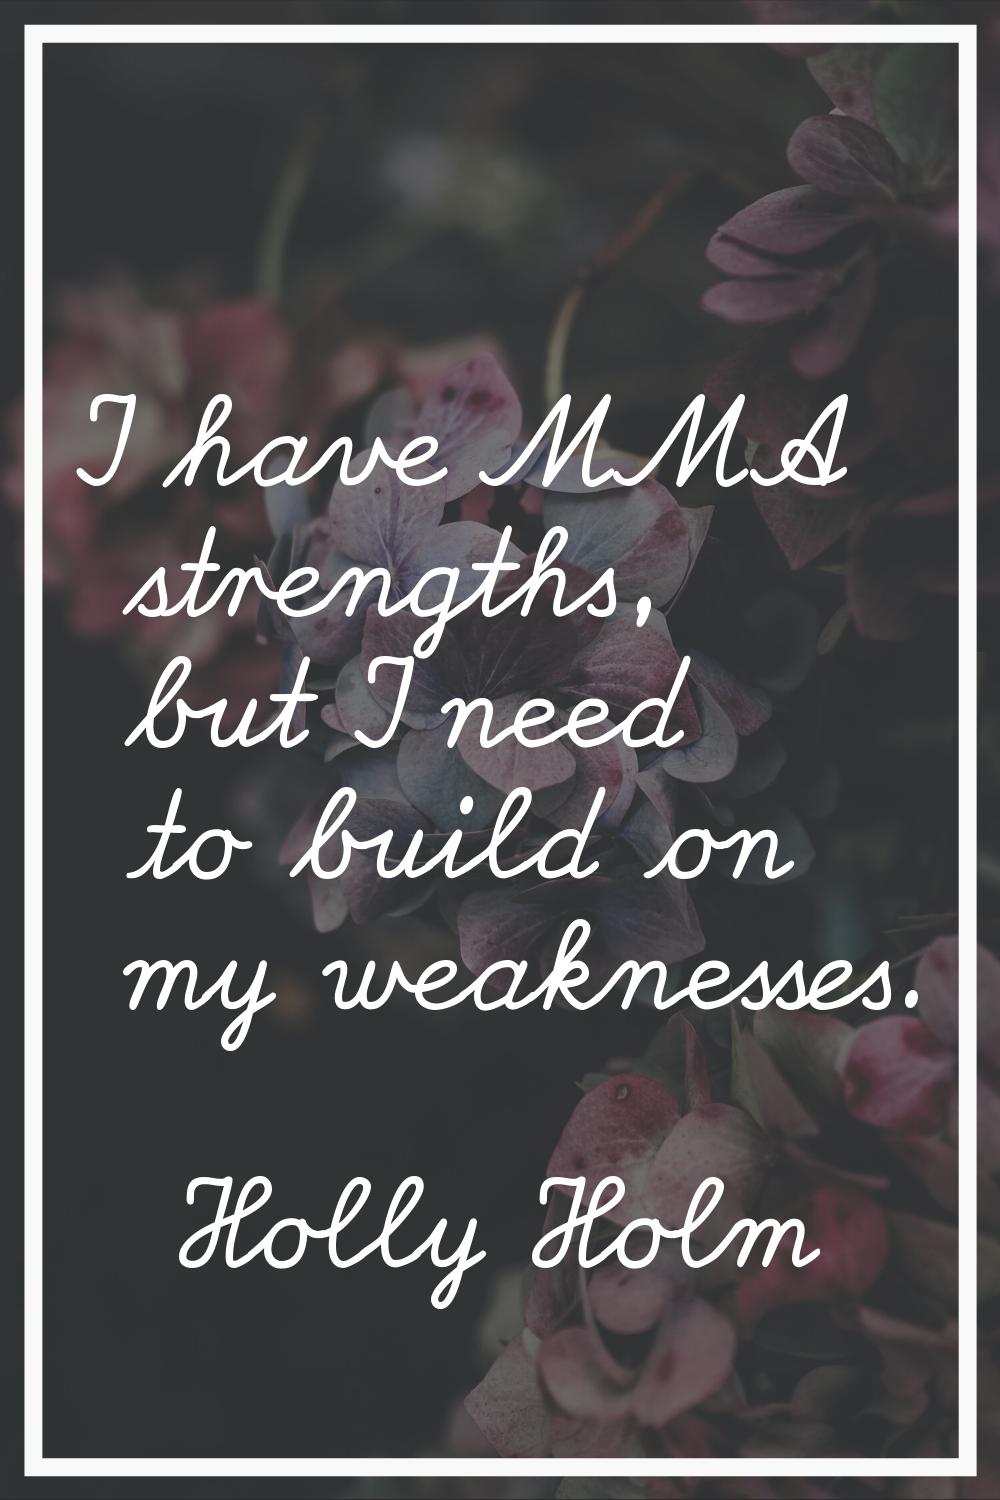 I have MMA strengths, but I need to build on my weaknesses.